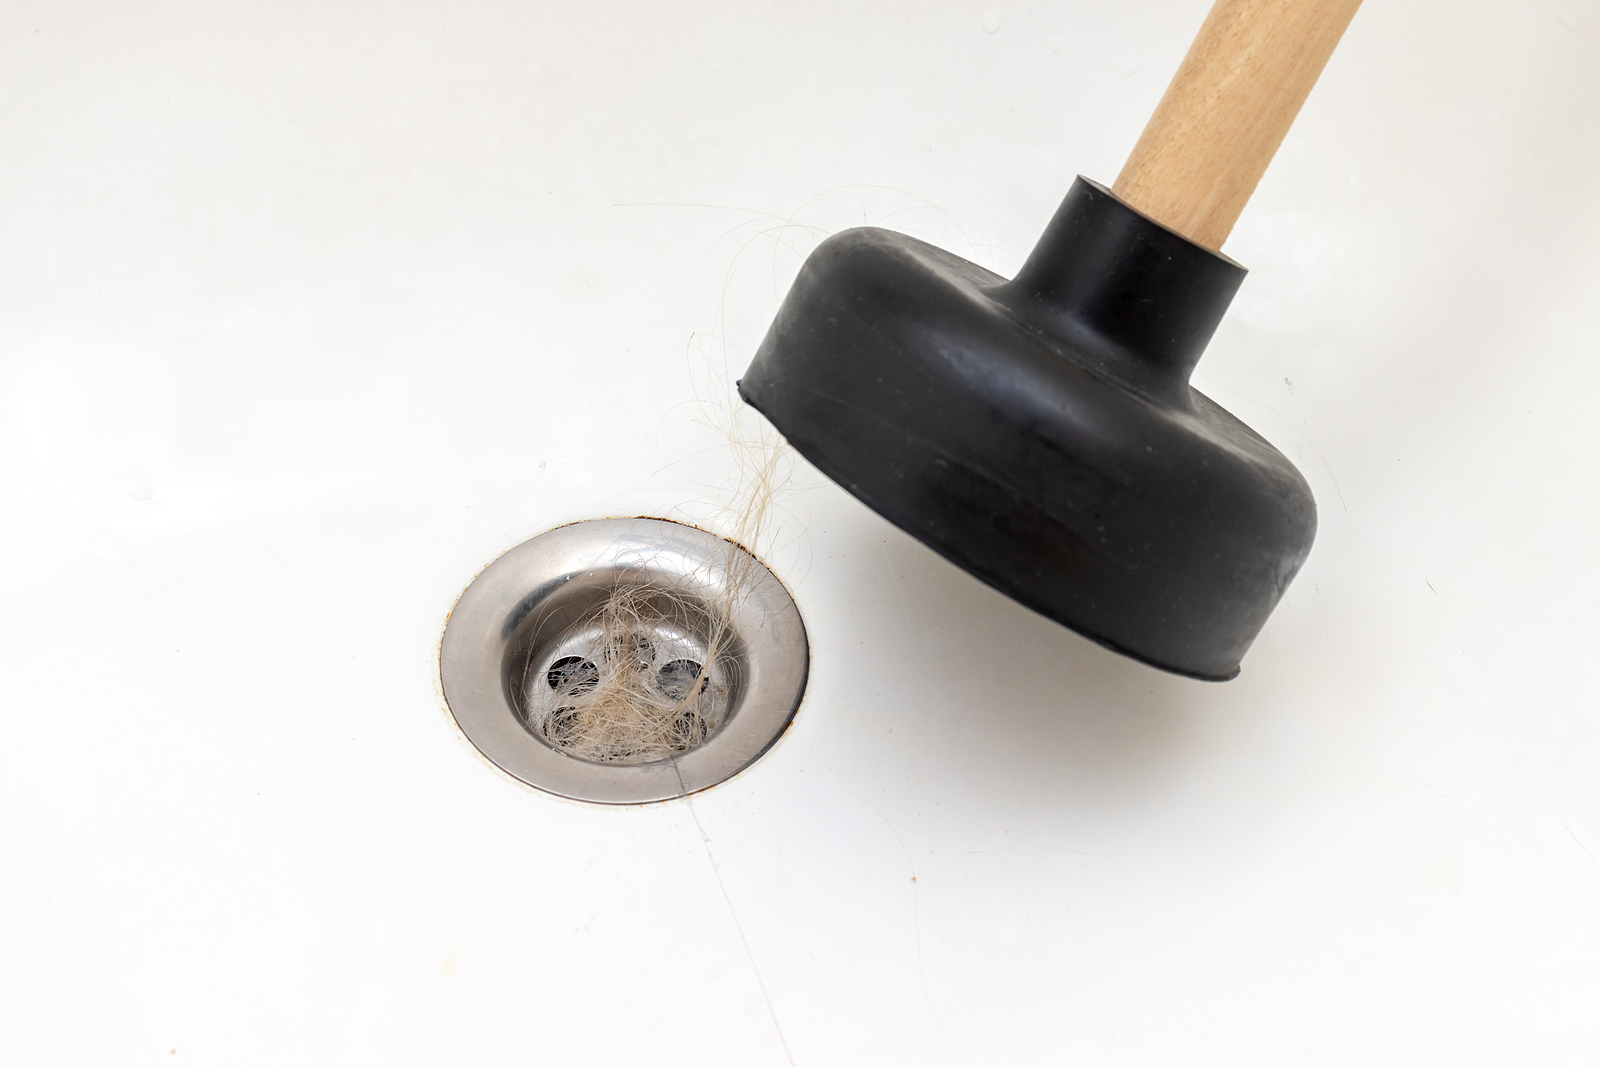 How to Get Hair Out of a Drain: Ways to Fix and Prevent Clogs